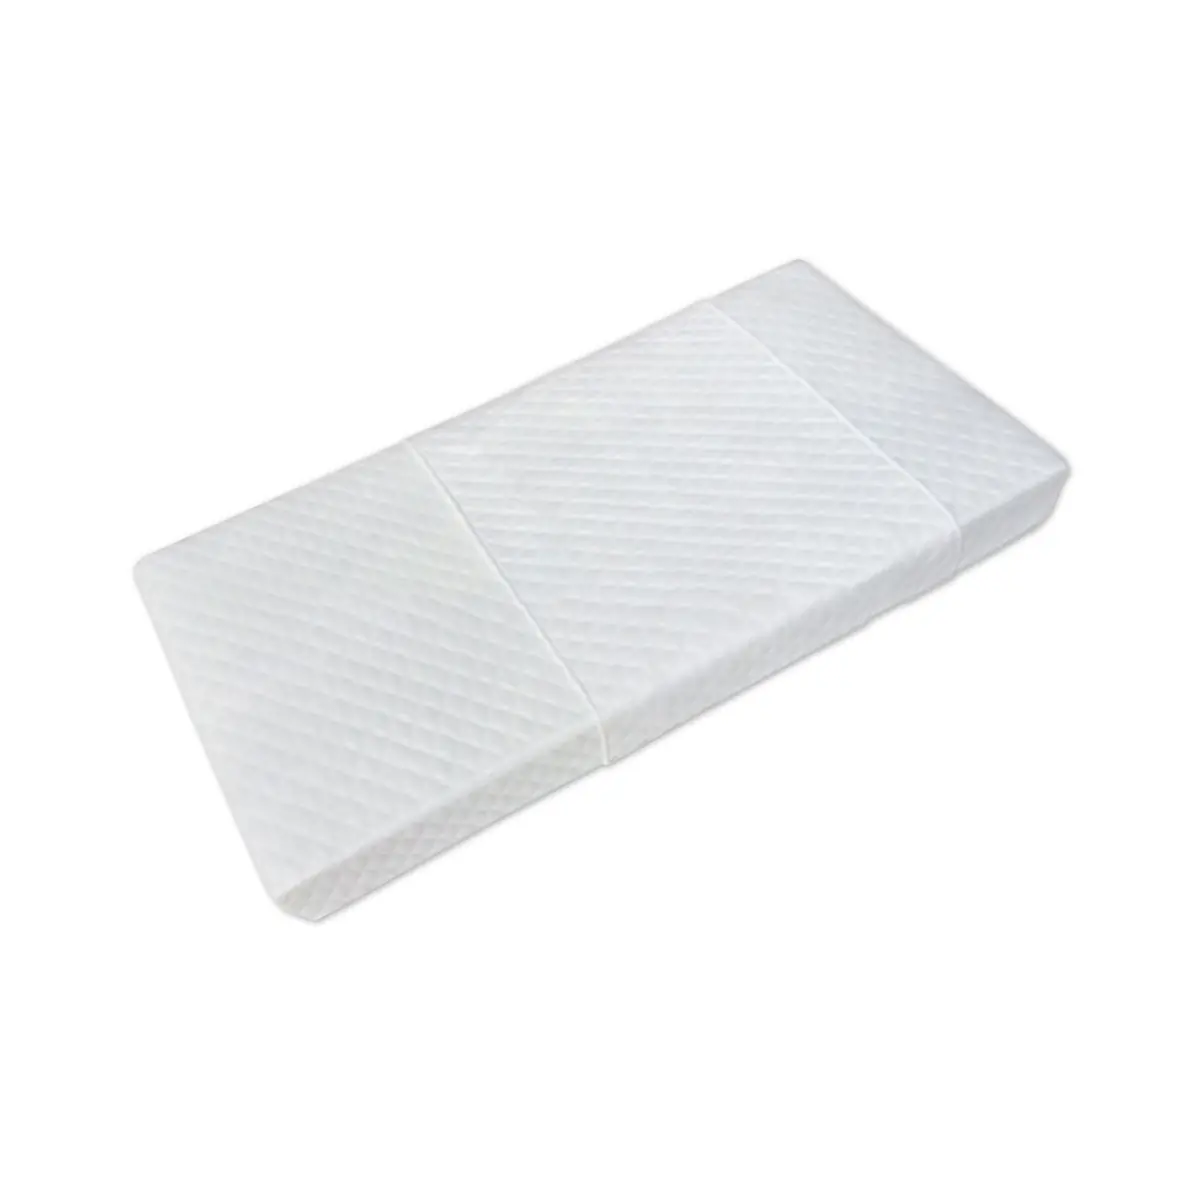 Image of Ventalux Spring Interior Cot Mattress With ‘Gliding Protector’ (120x60)